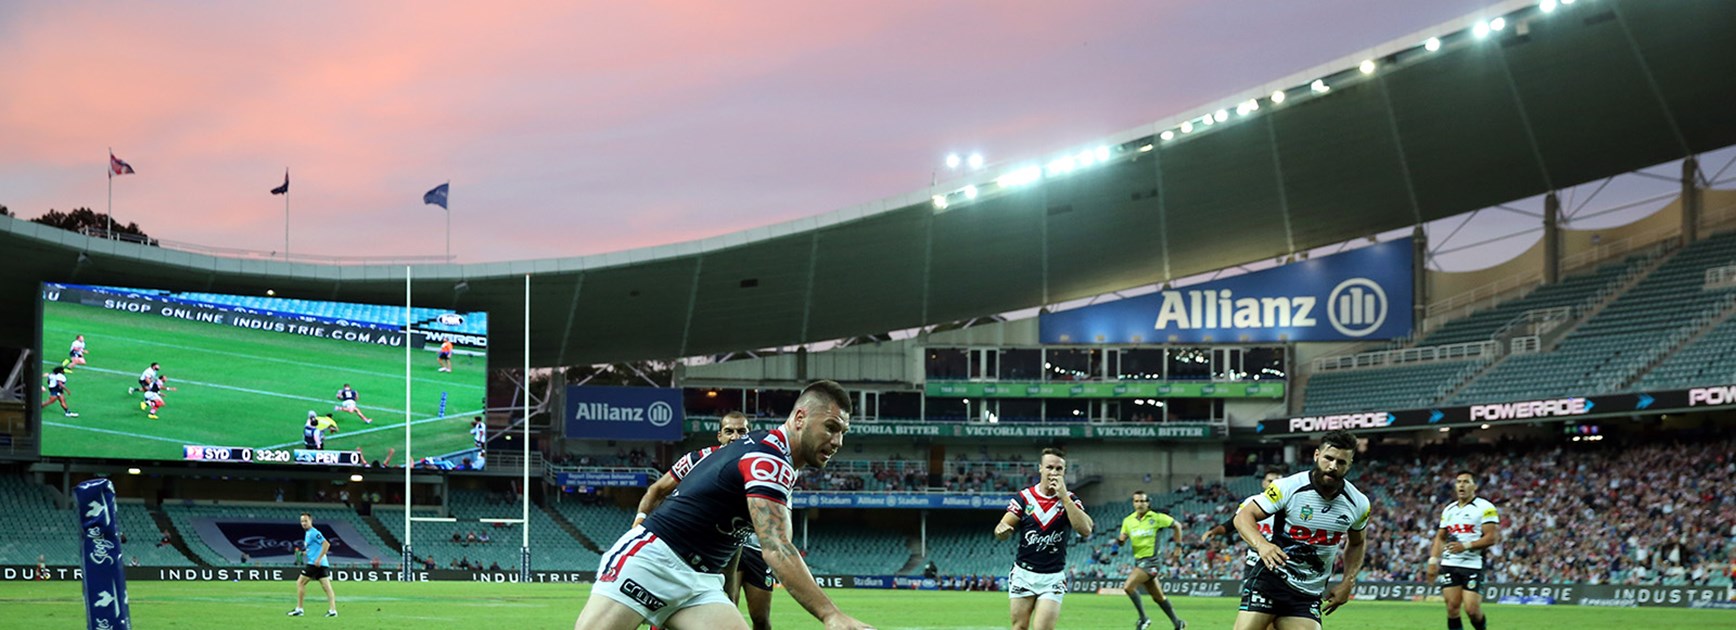 Shaun Kenny-Dowall scores another try for the Roosters.